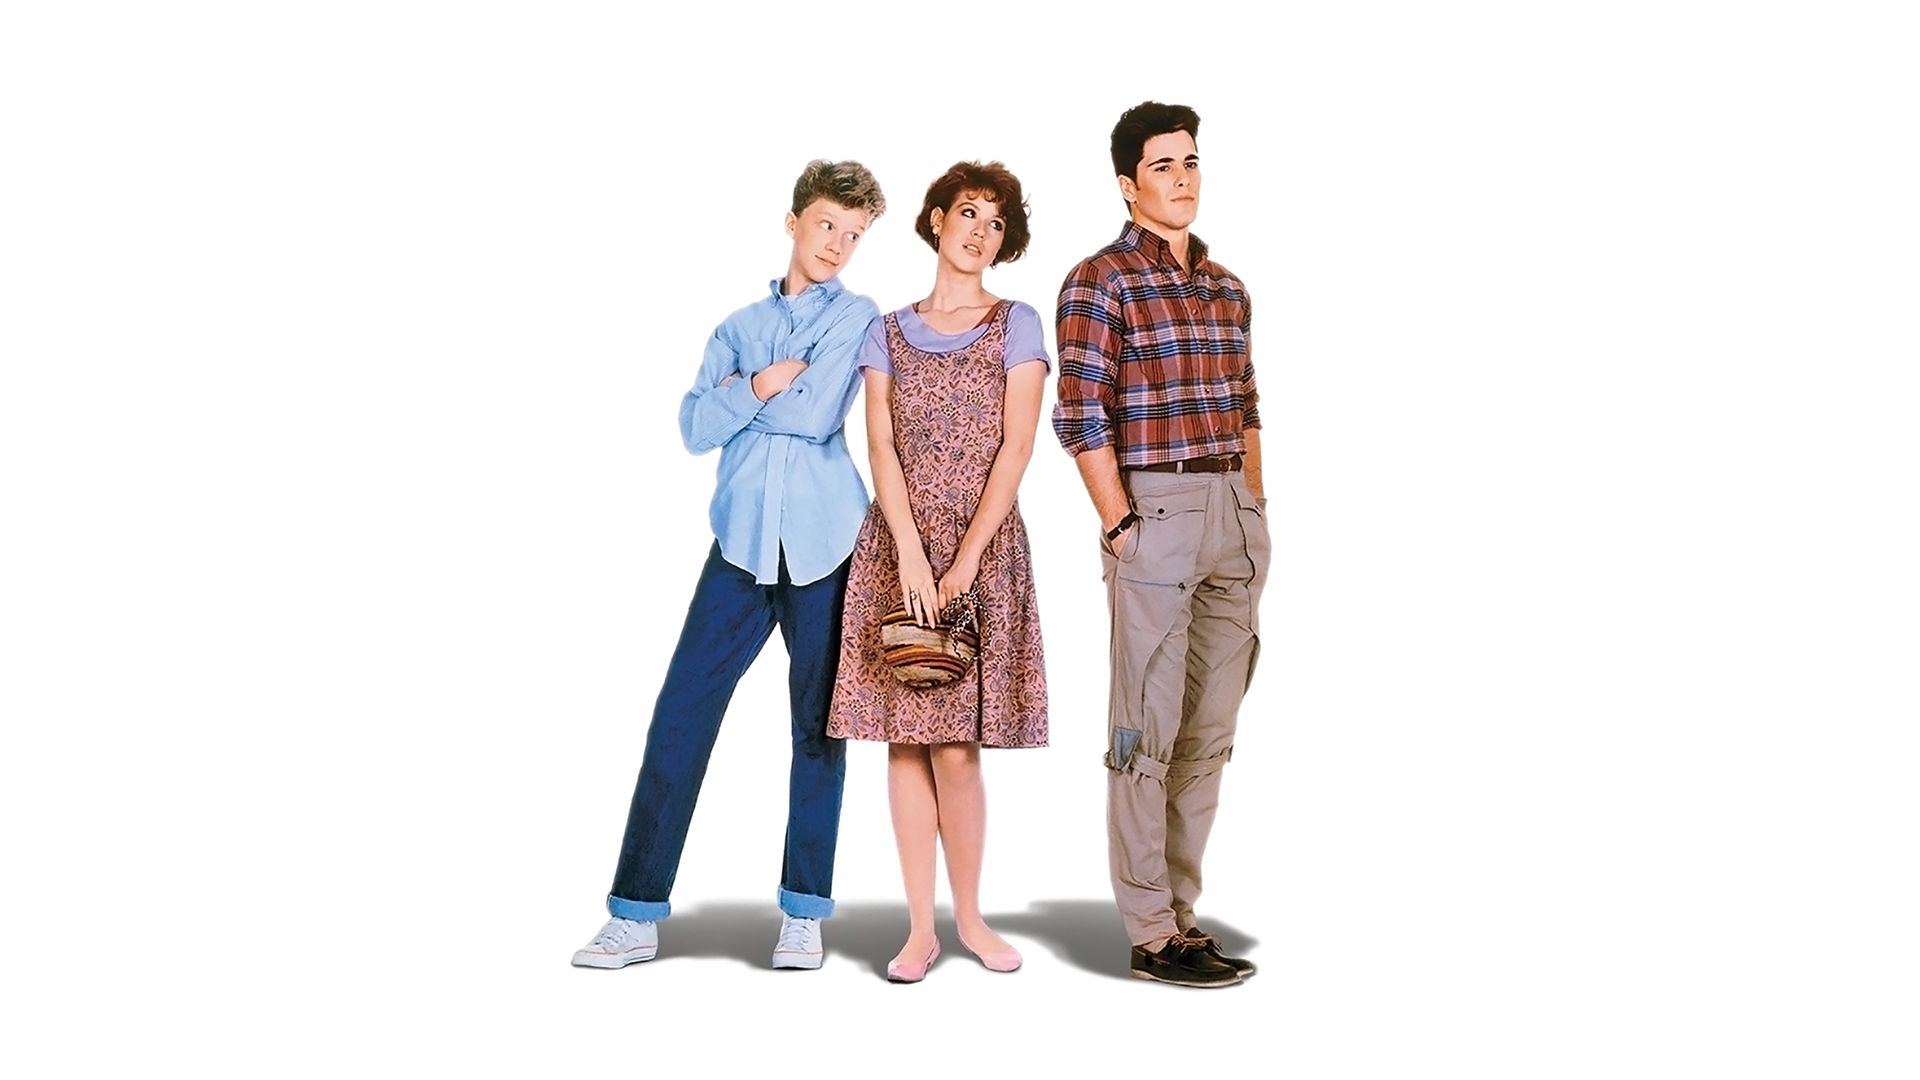 Sixteen Candles background